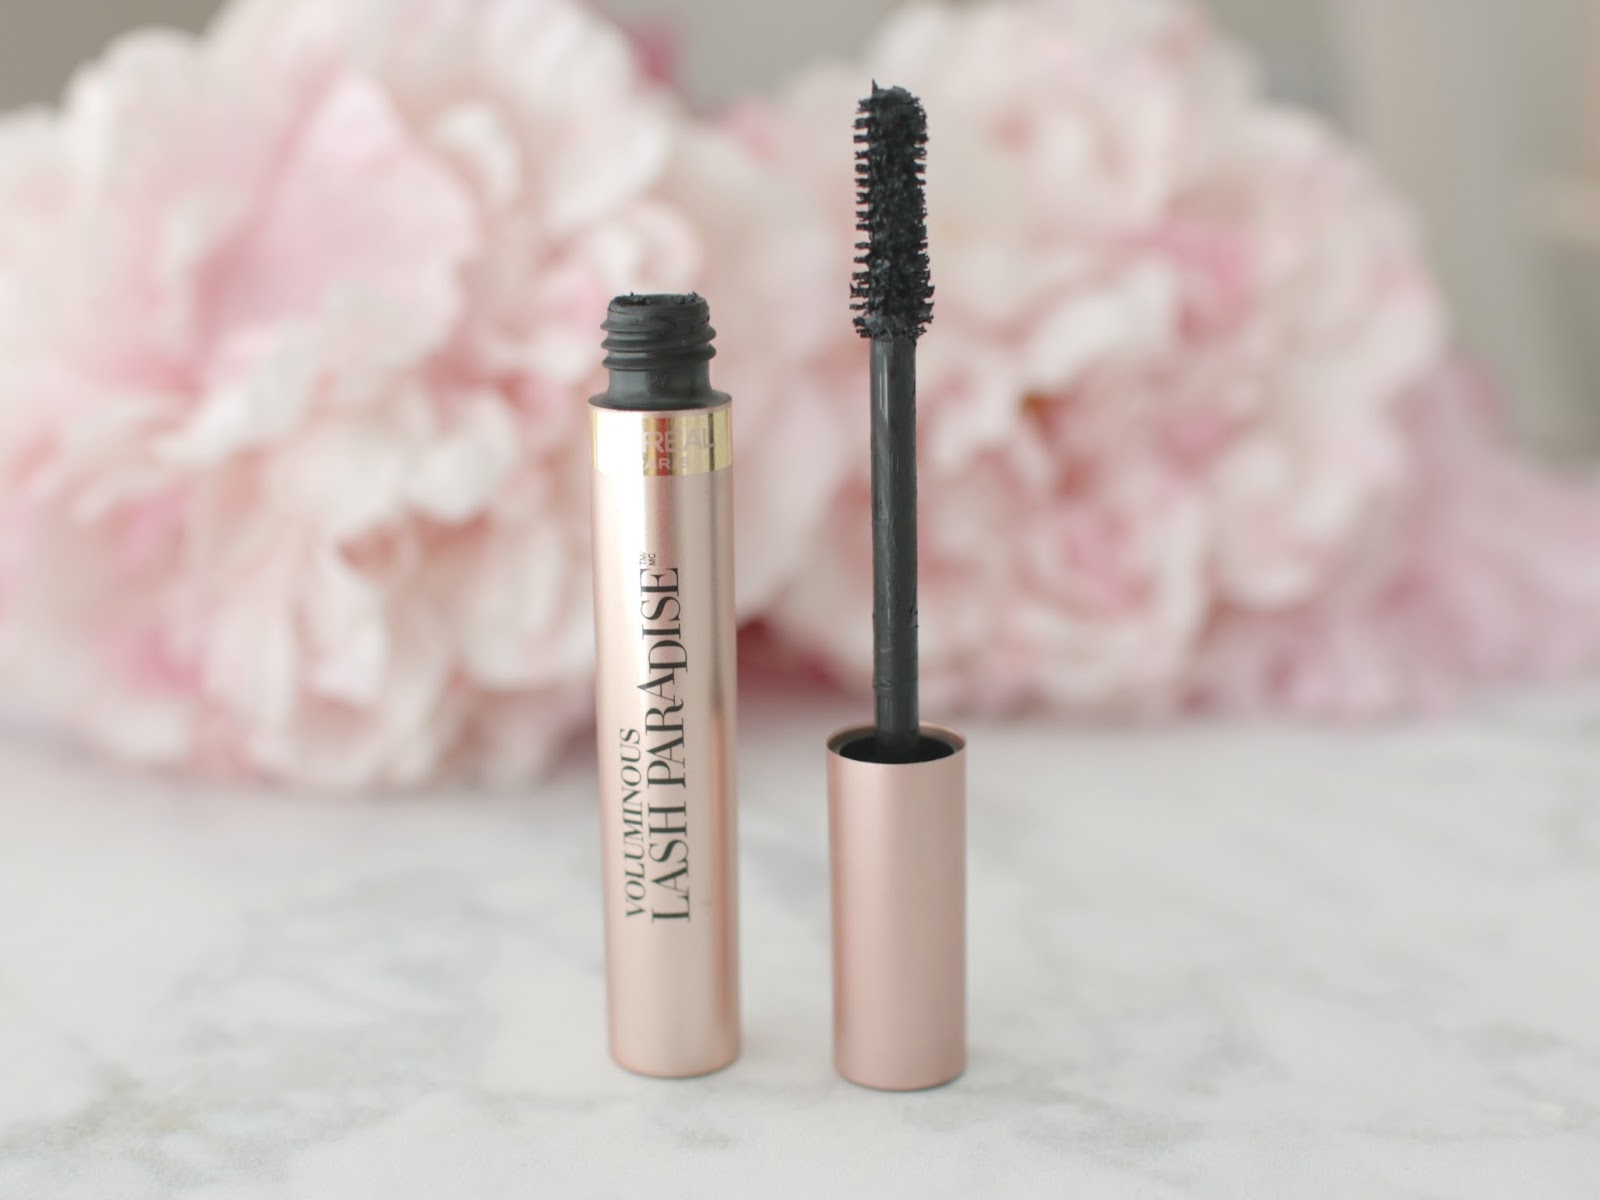 Two Drugstore Dupes For Too Faced Better Than Sex Mascara